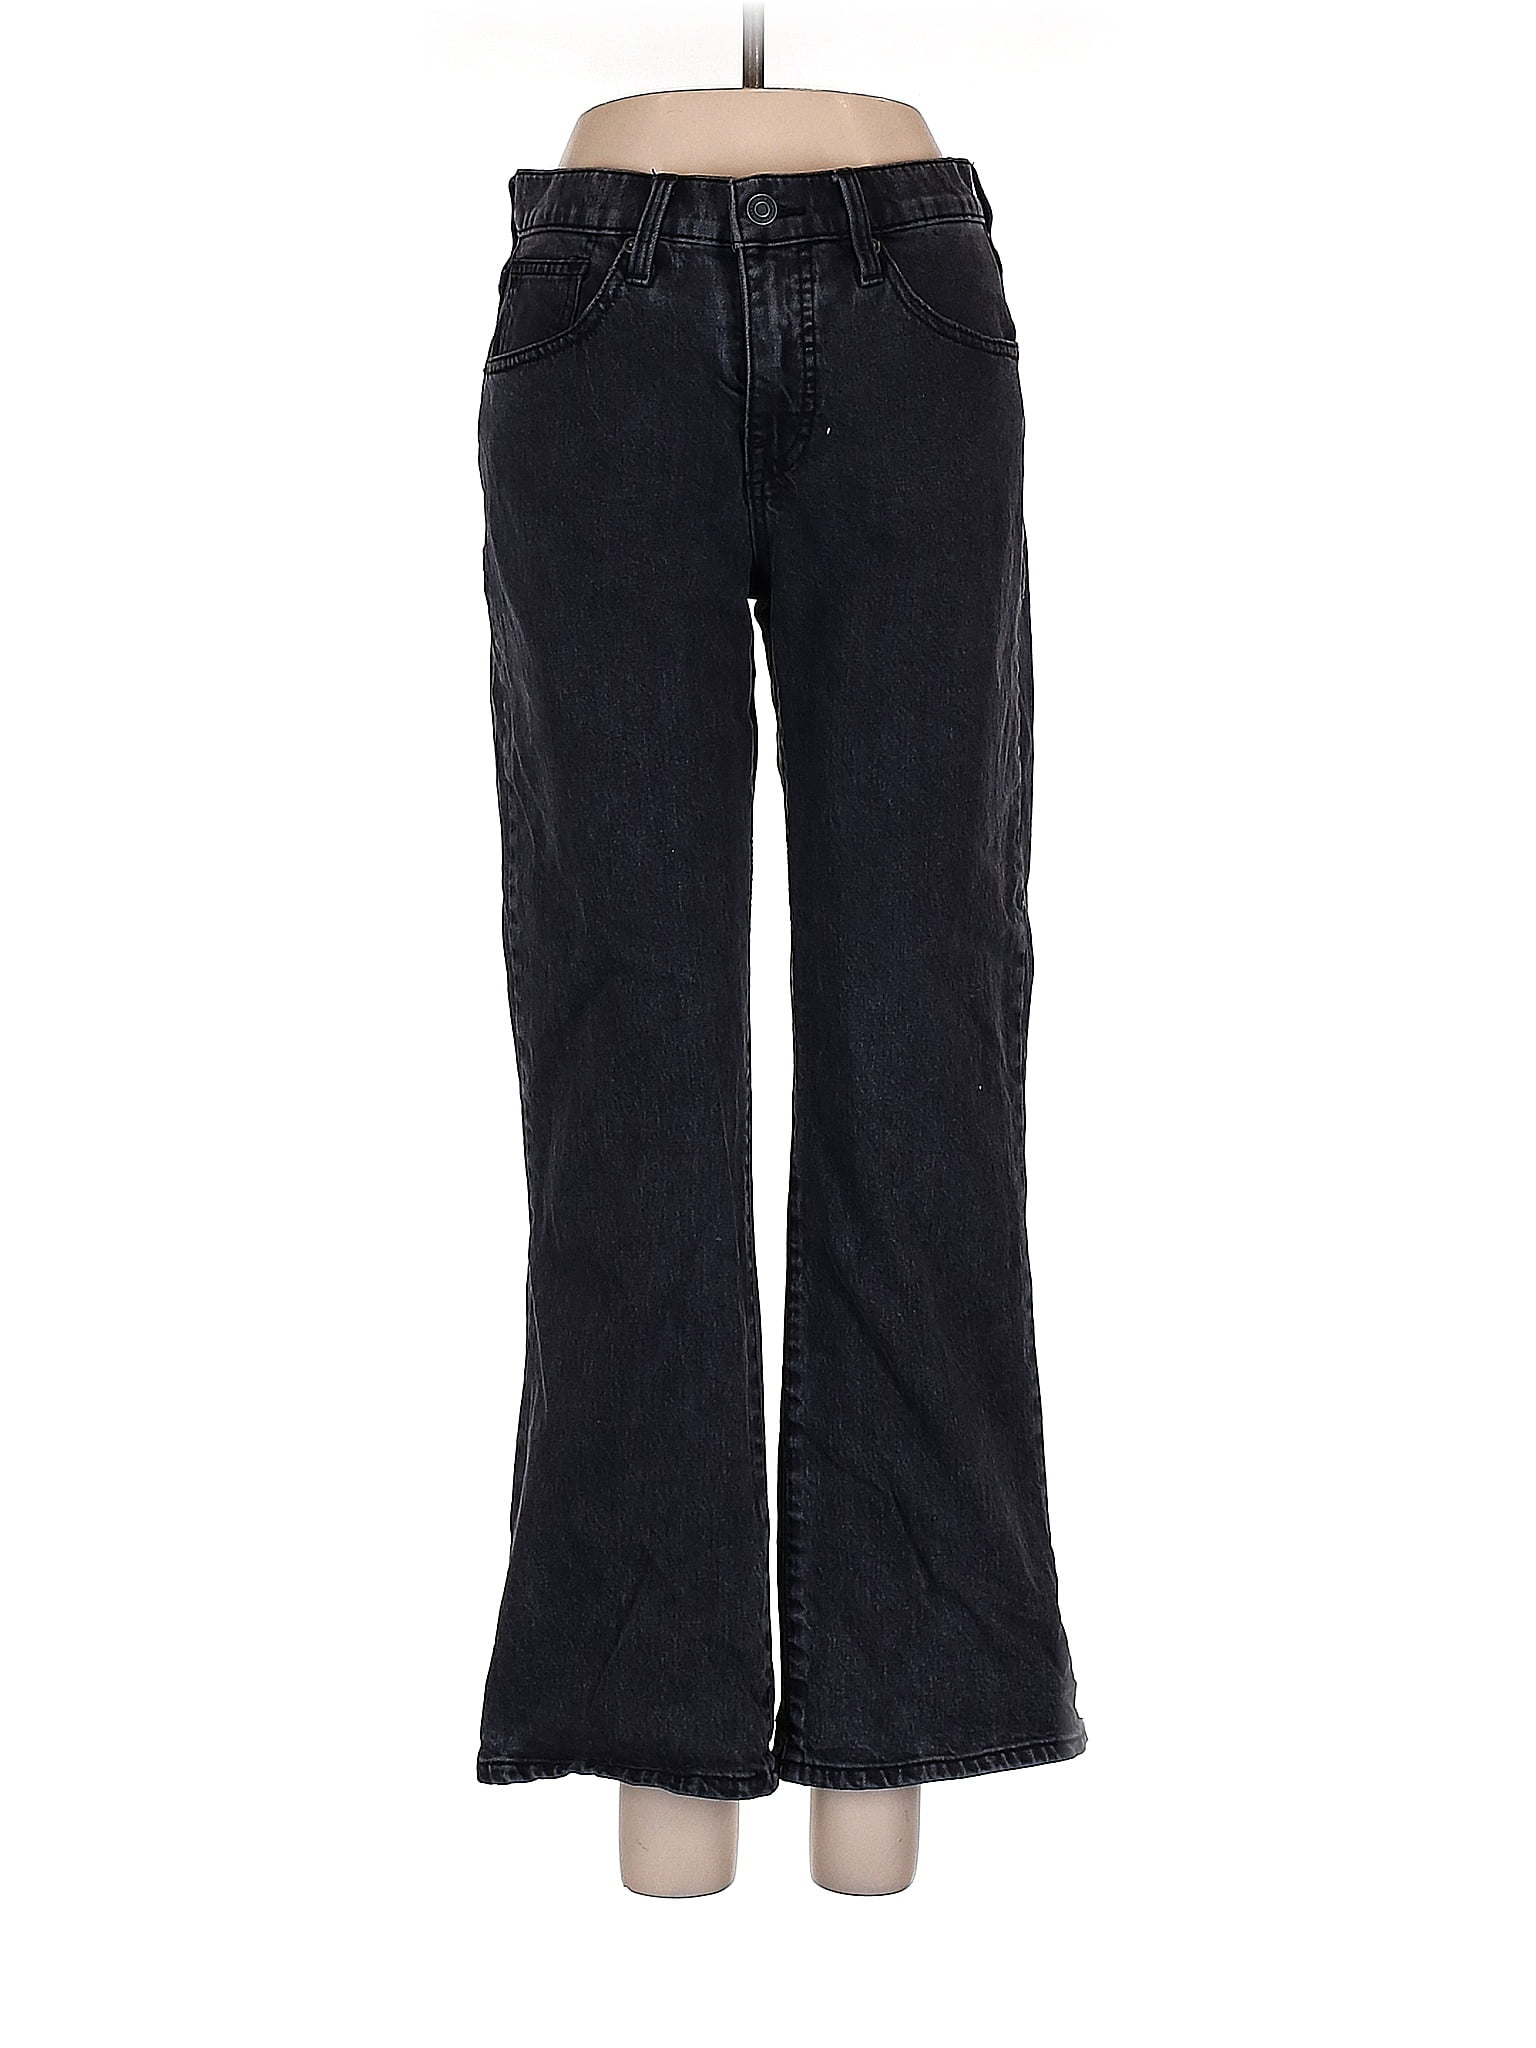 Lucky Brand Black Jeans Size 6 - 71% off | thredUP